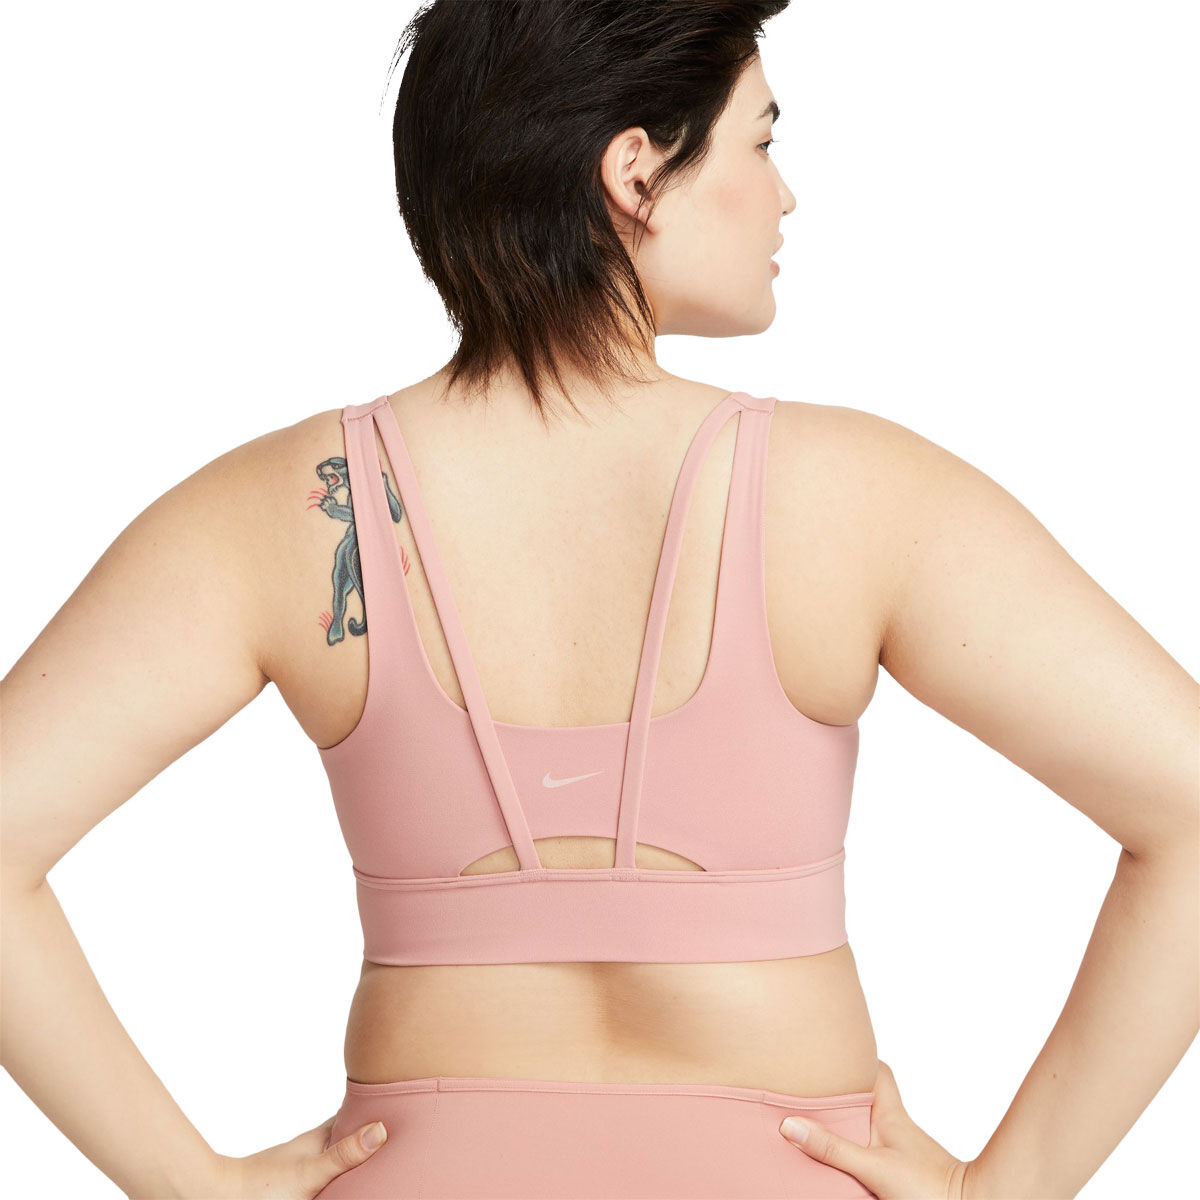 Alate Ellipse Medium-Support Padded Longline Sports Bra by Nike Online, THE ICONIC